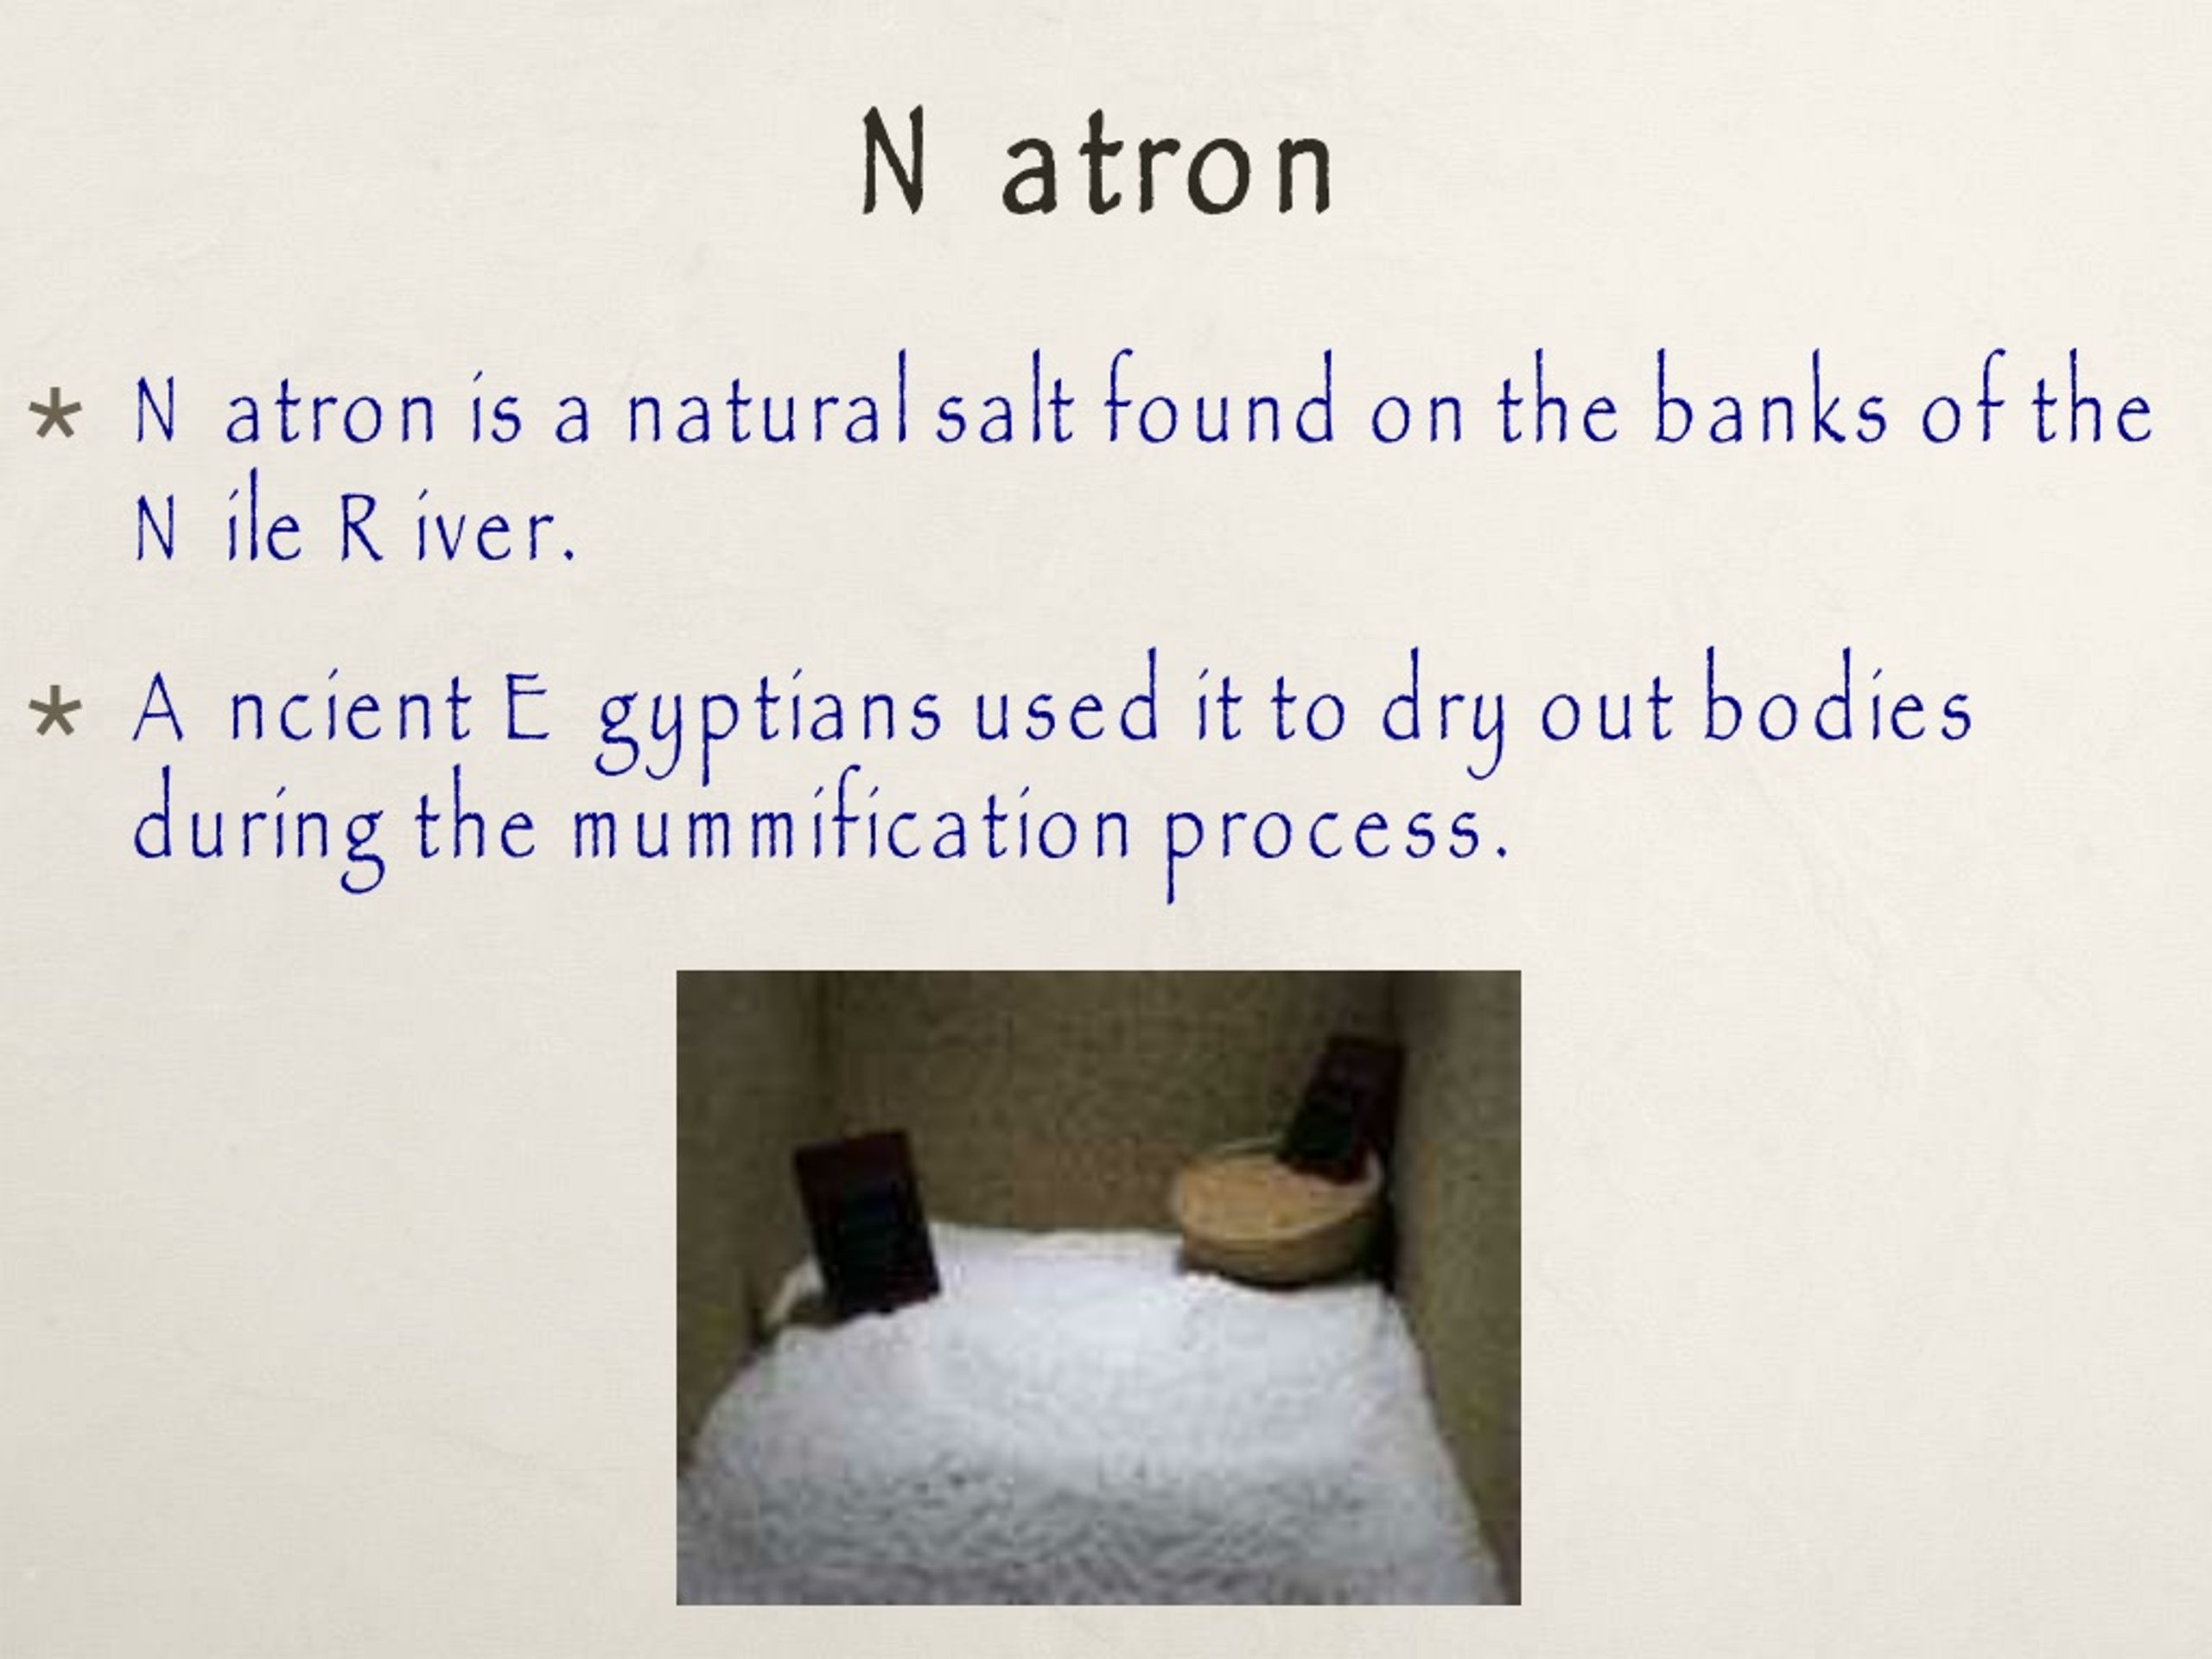 what is natron slat made of